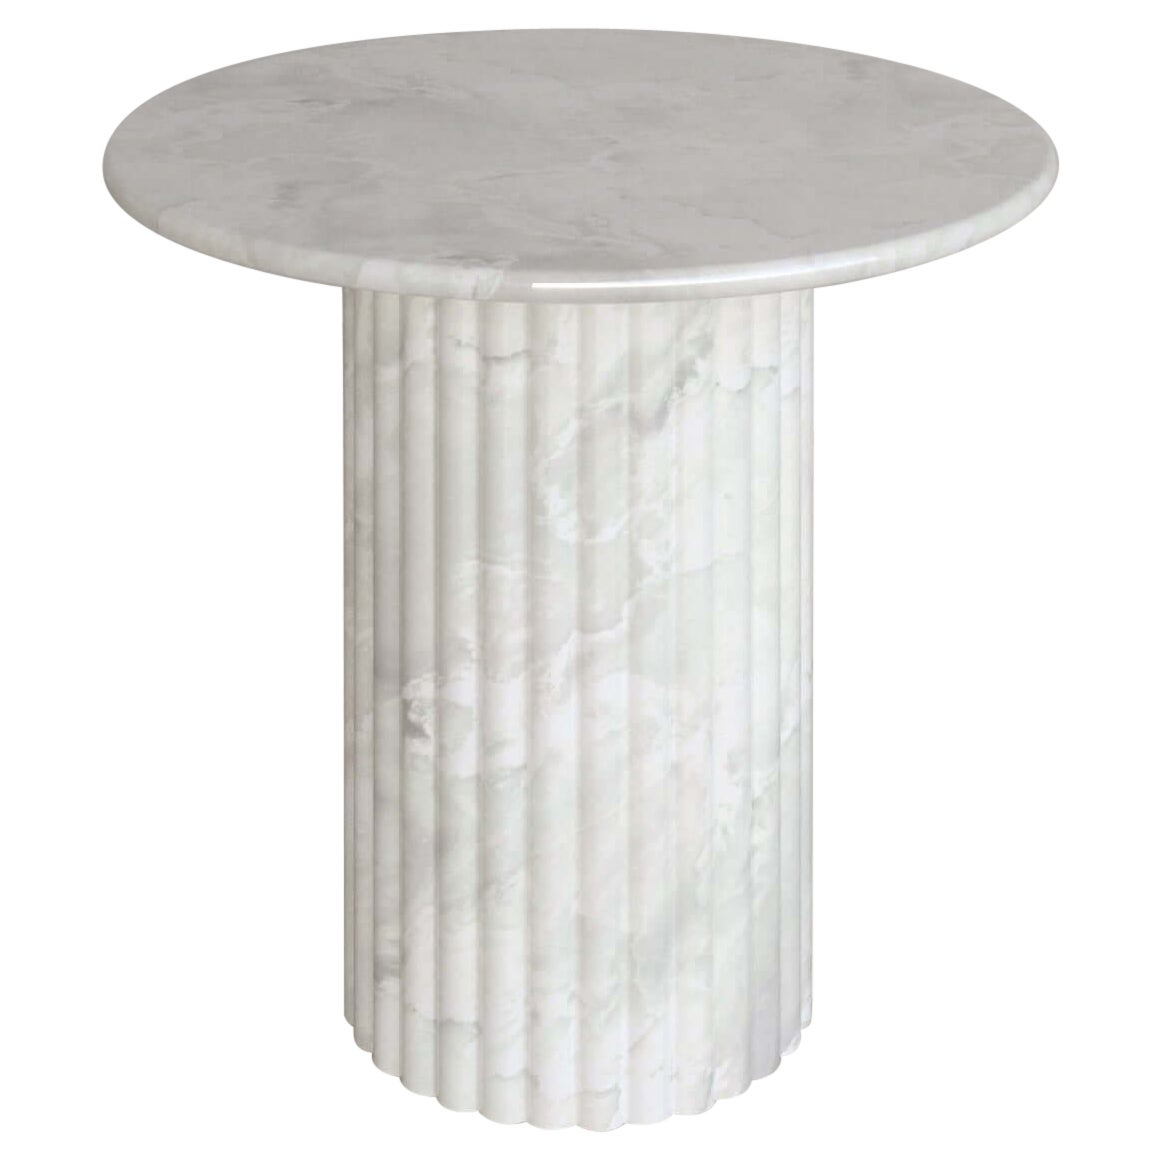 Bianco Onyx Antica Occasional Table by The Essentialist For Sale